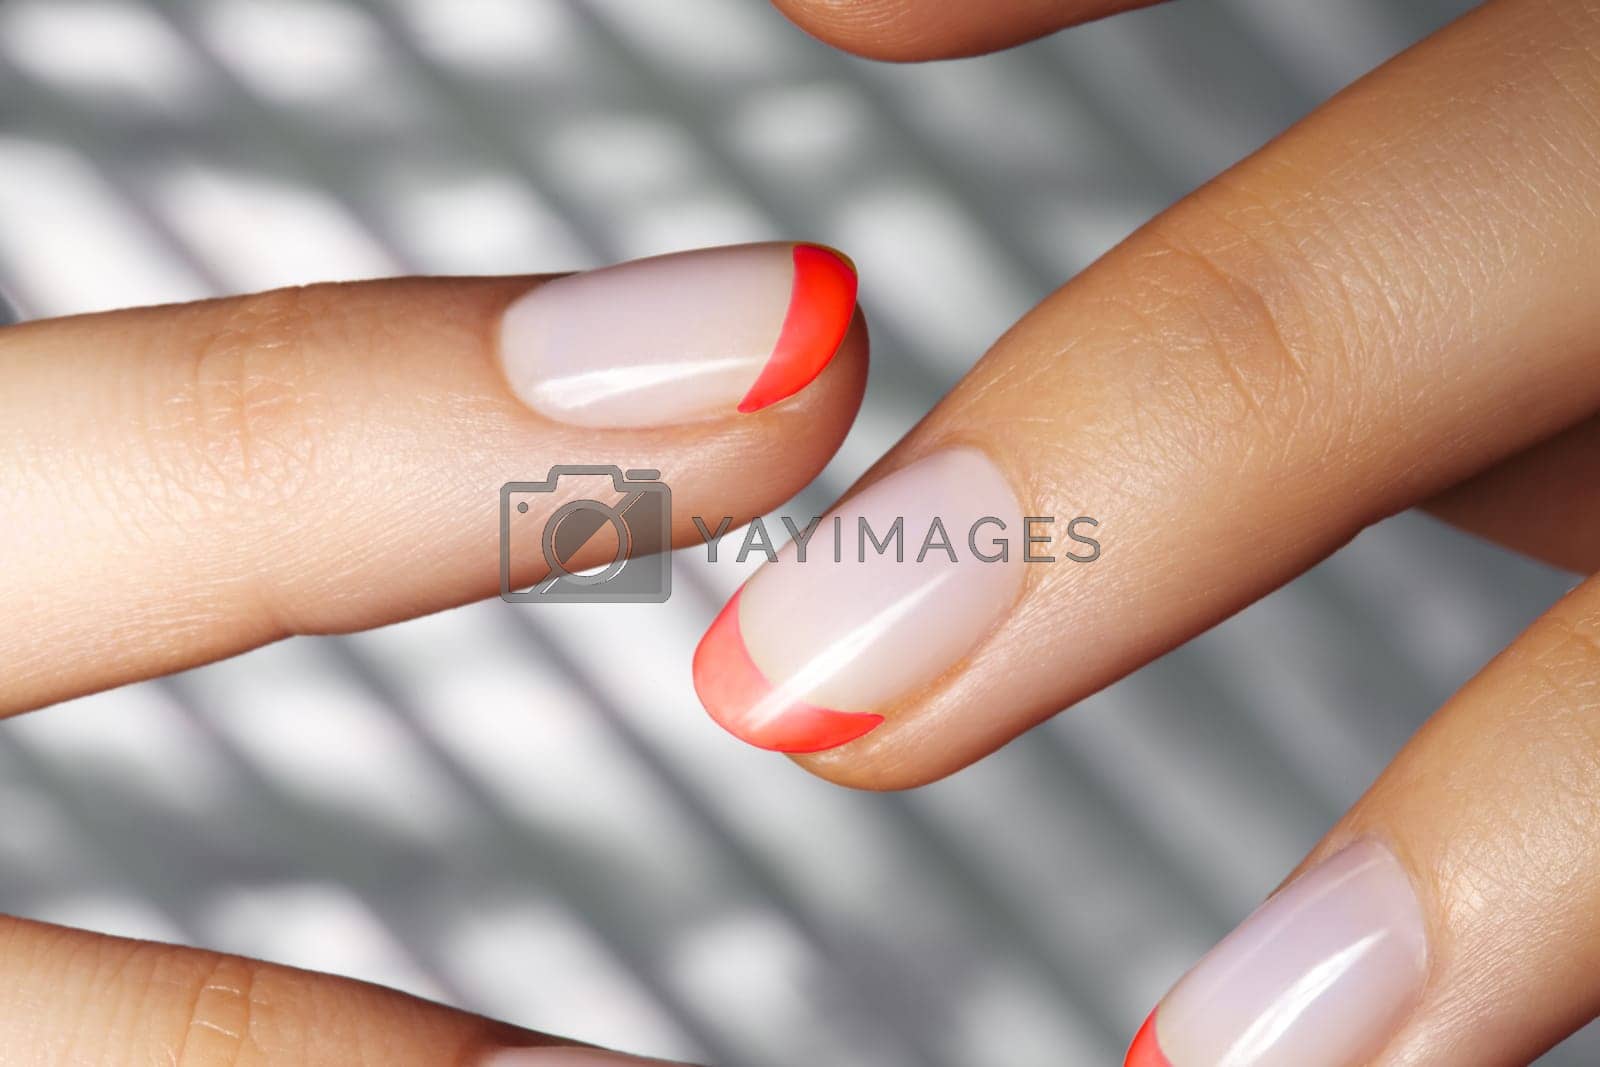 Royalty free image of Hands with bright Red French Manicure on Geometric Background. Nails Art Design. Close-up of Female Hands with Trendy Neon Nails on Silver Striped Print Background by MarinaFrost